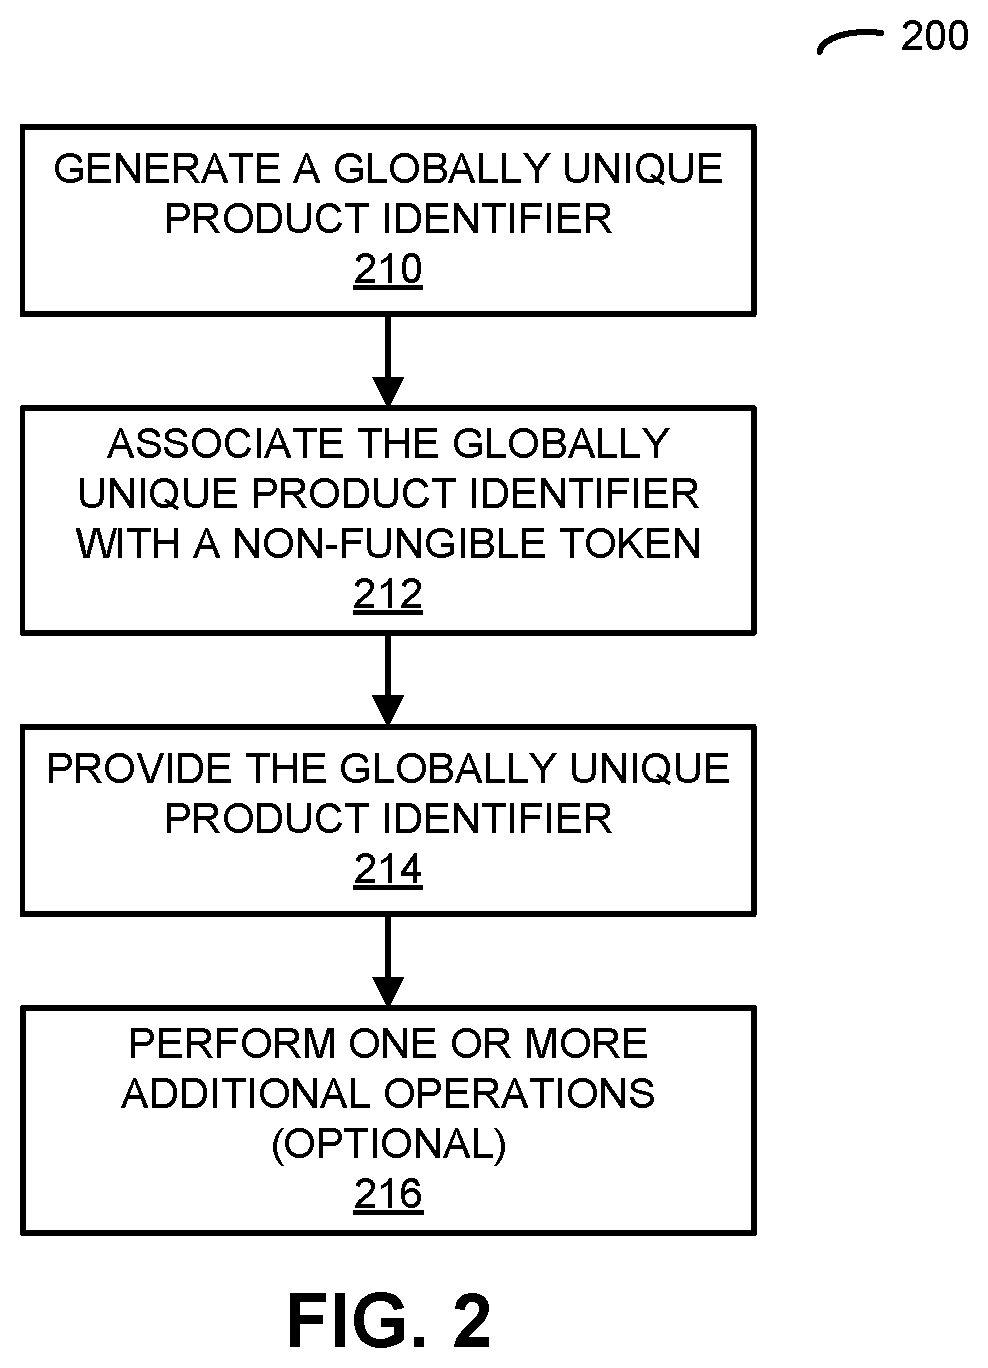 Decentralized Generation and Management of Product Identifiers and Metadata